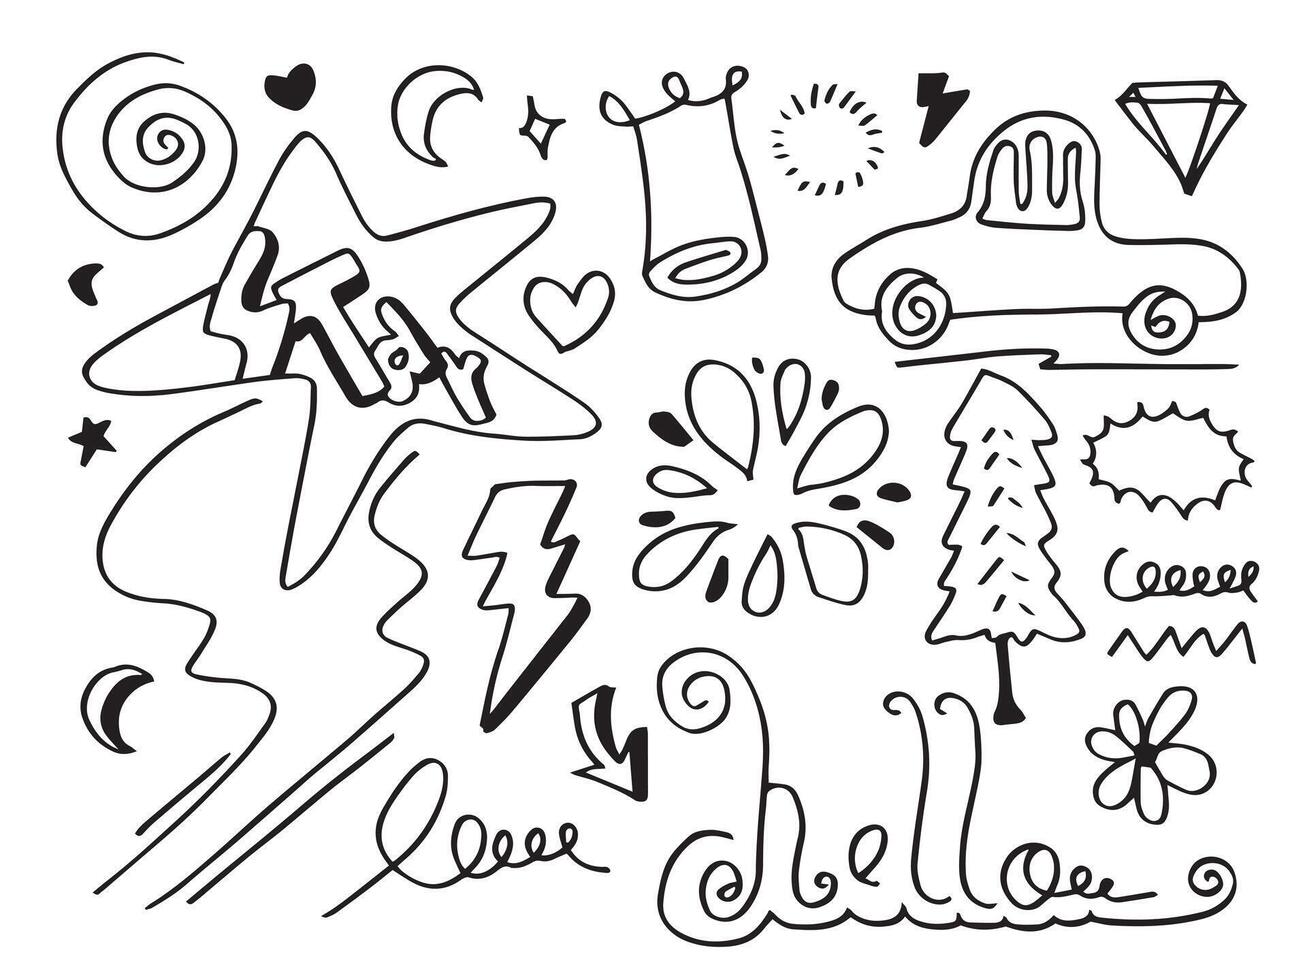 Vector illustration Hand drawn car arrow, star, thunderbolt, clouds and other element design.